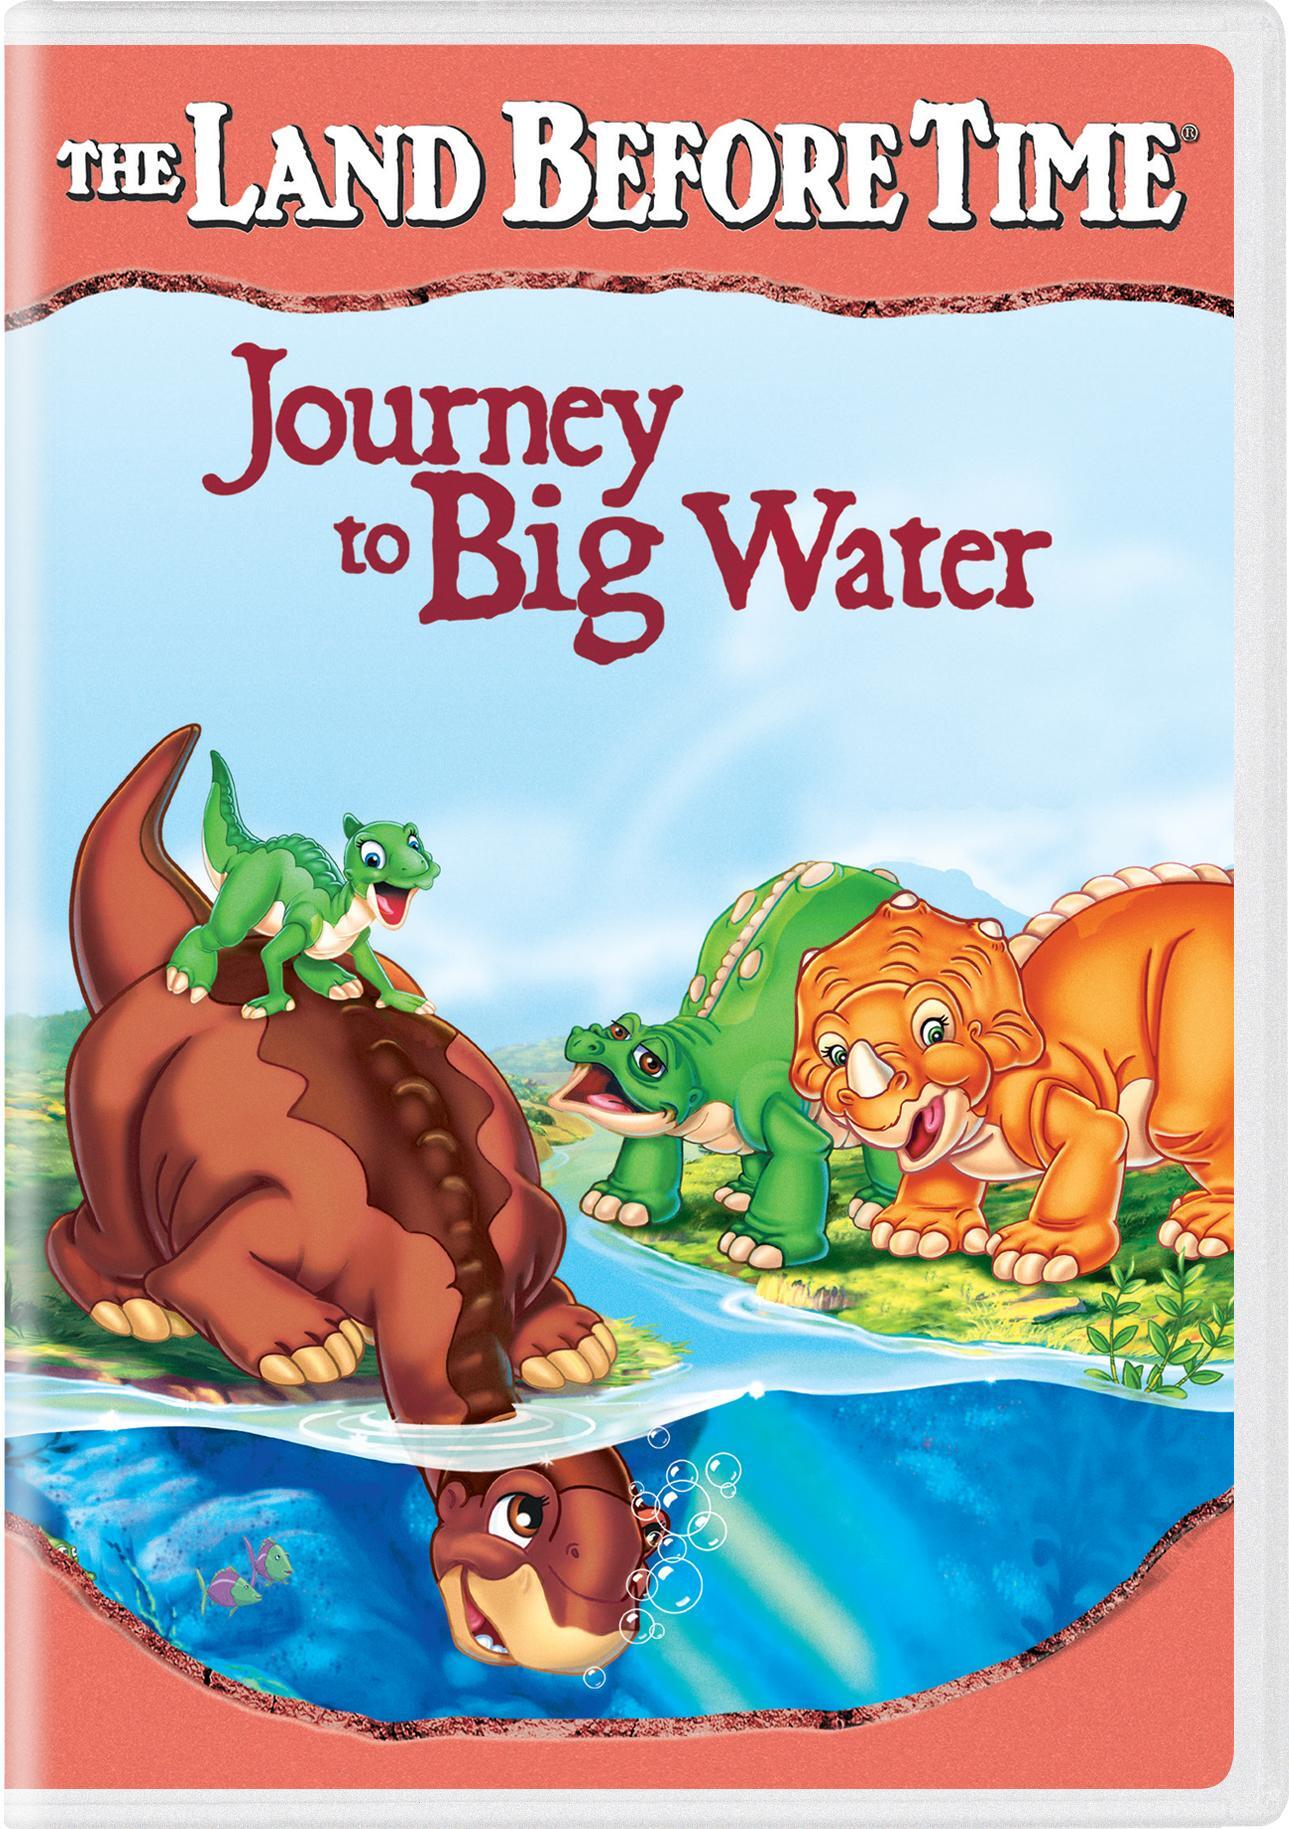 The Land Before Time 9 - Journey To Big Water - DVD [ 2002 ]  - Children Movies On DVD - Movies On GRUV